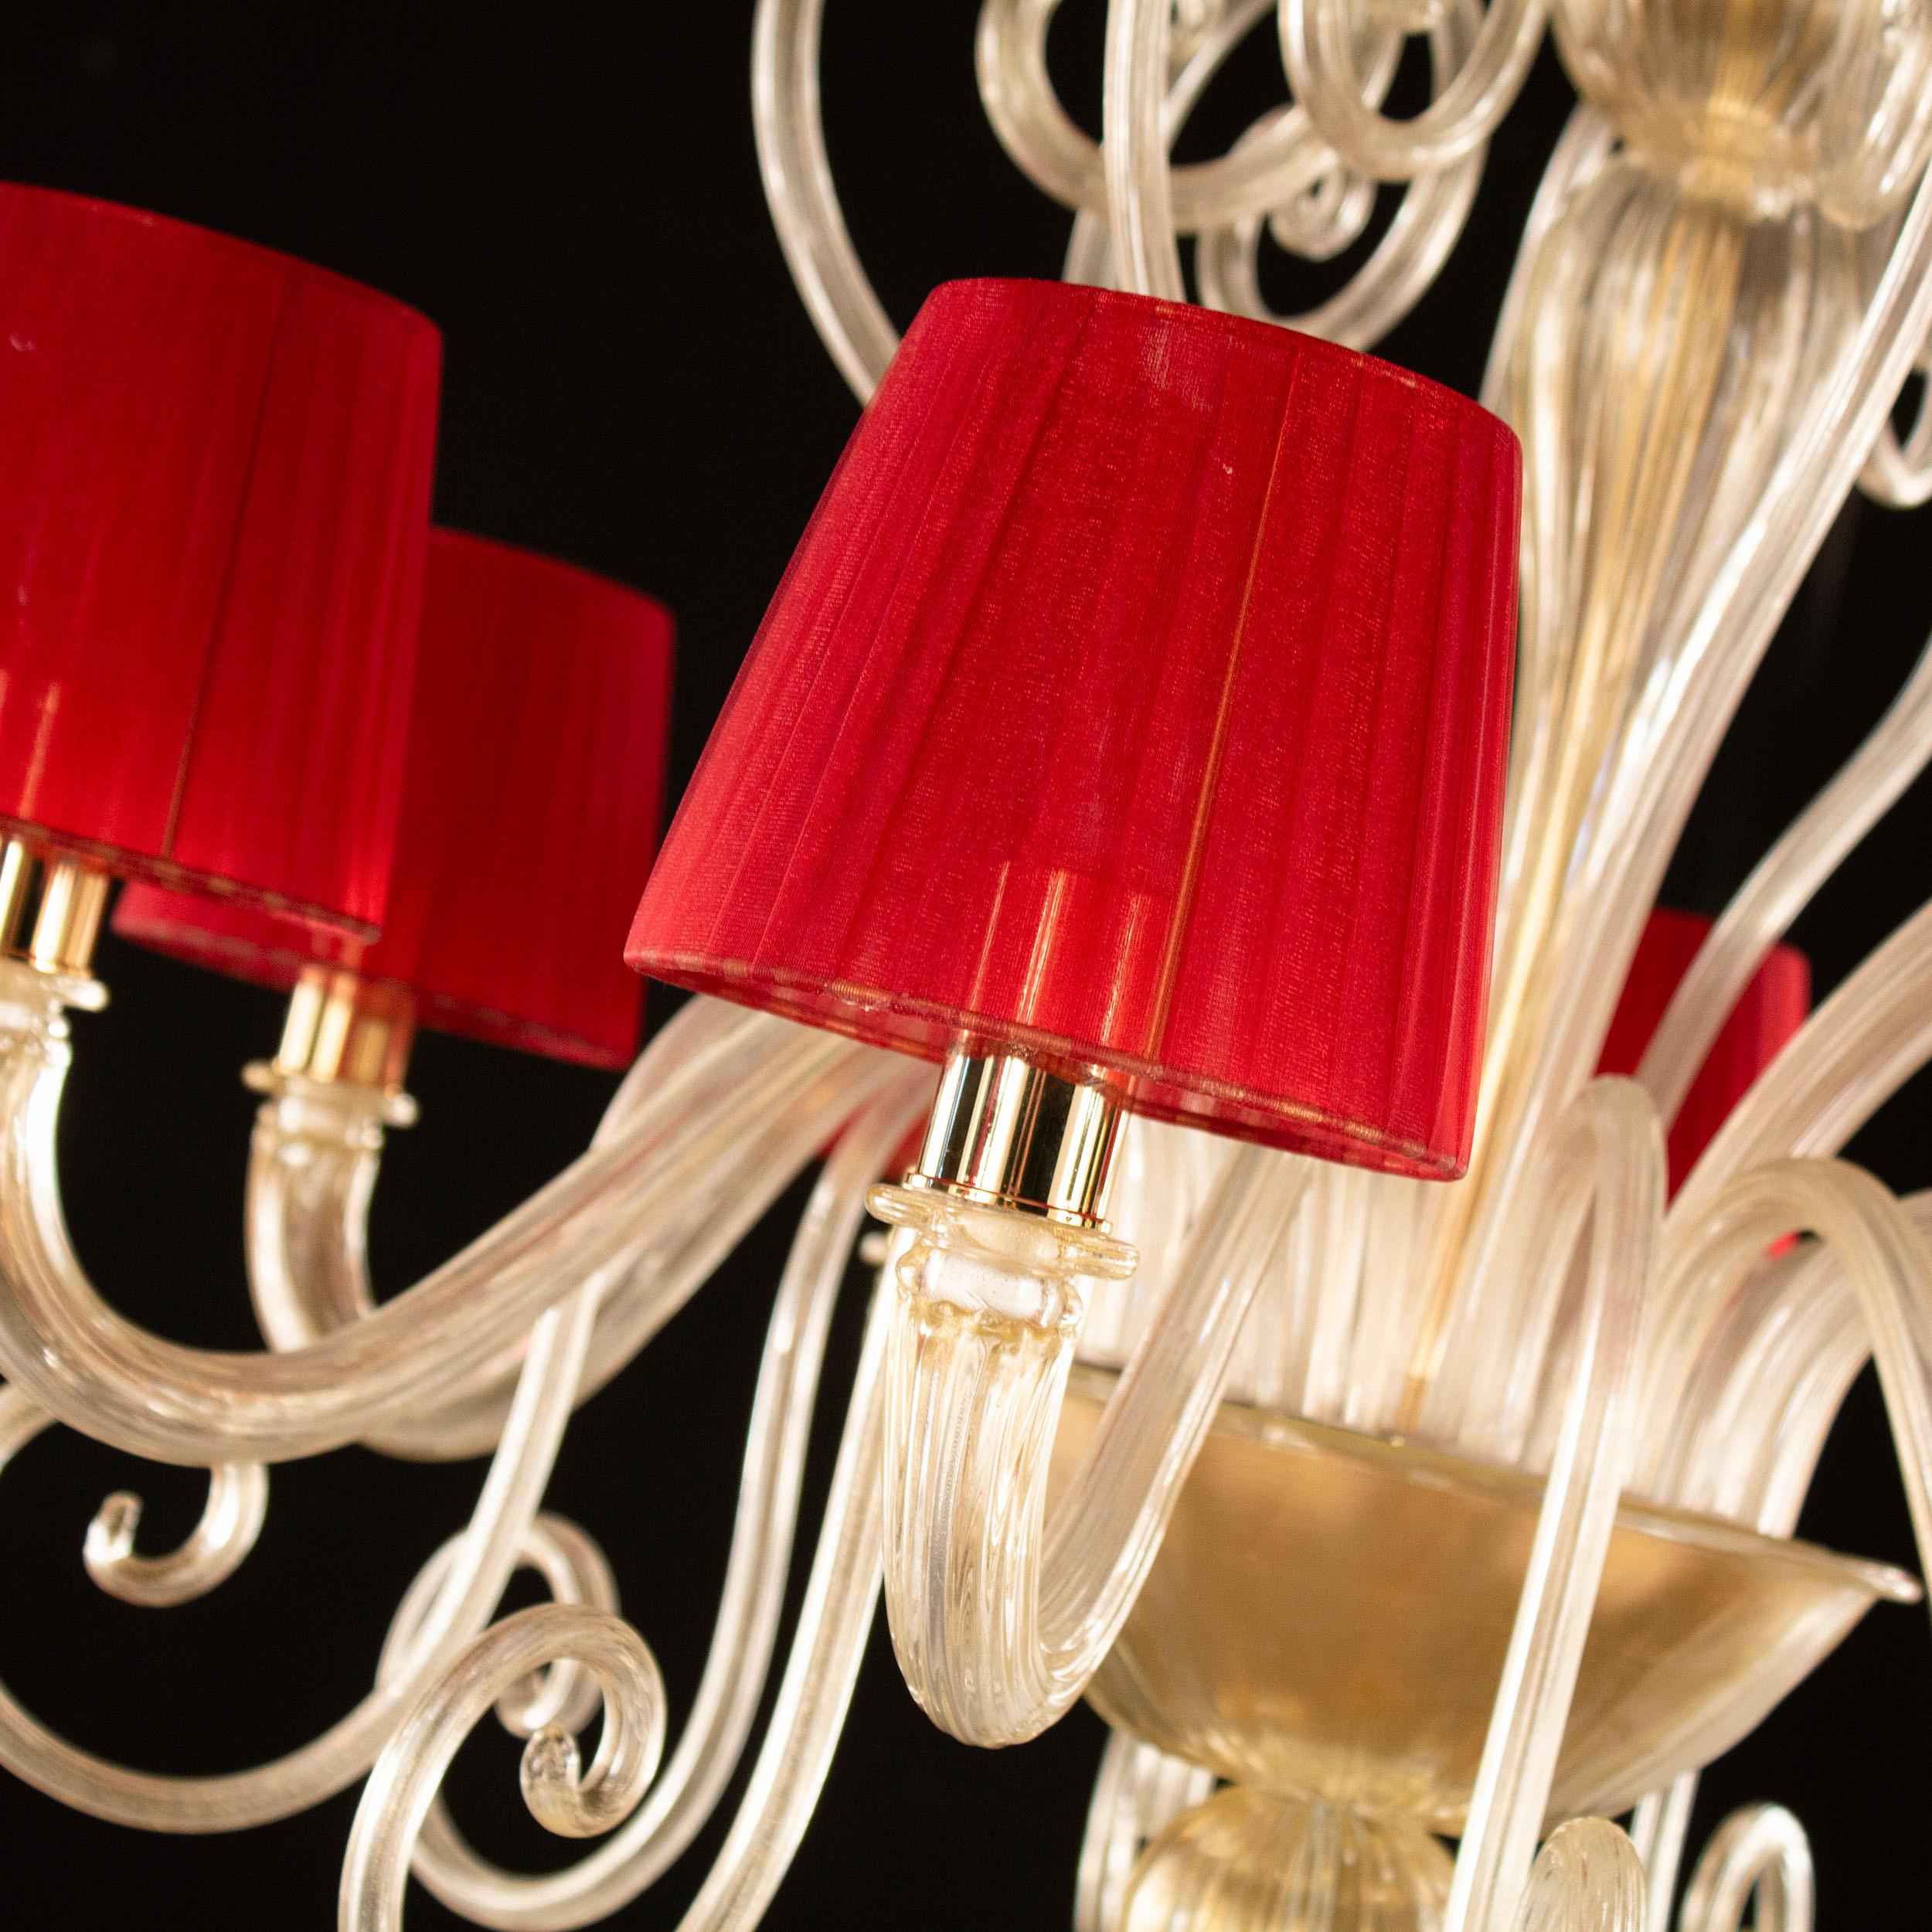 Gatsby chandelier 8 lights golden leaf artistic Murano glass, with red organza lampshades by Multiforme
The Venetian chandelier Gatsby is the perfect combination of elegant and modern elements. The use of color featuring bright tones, the surface